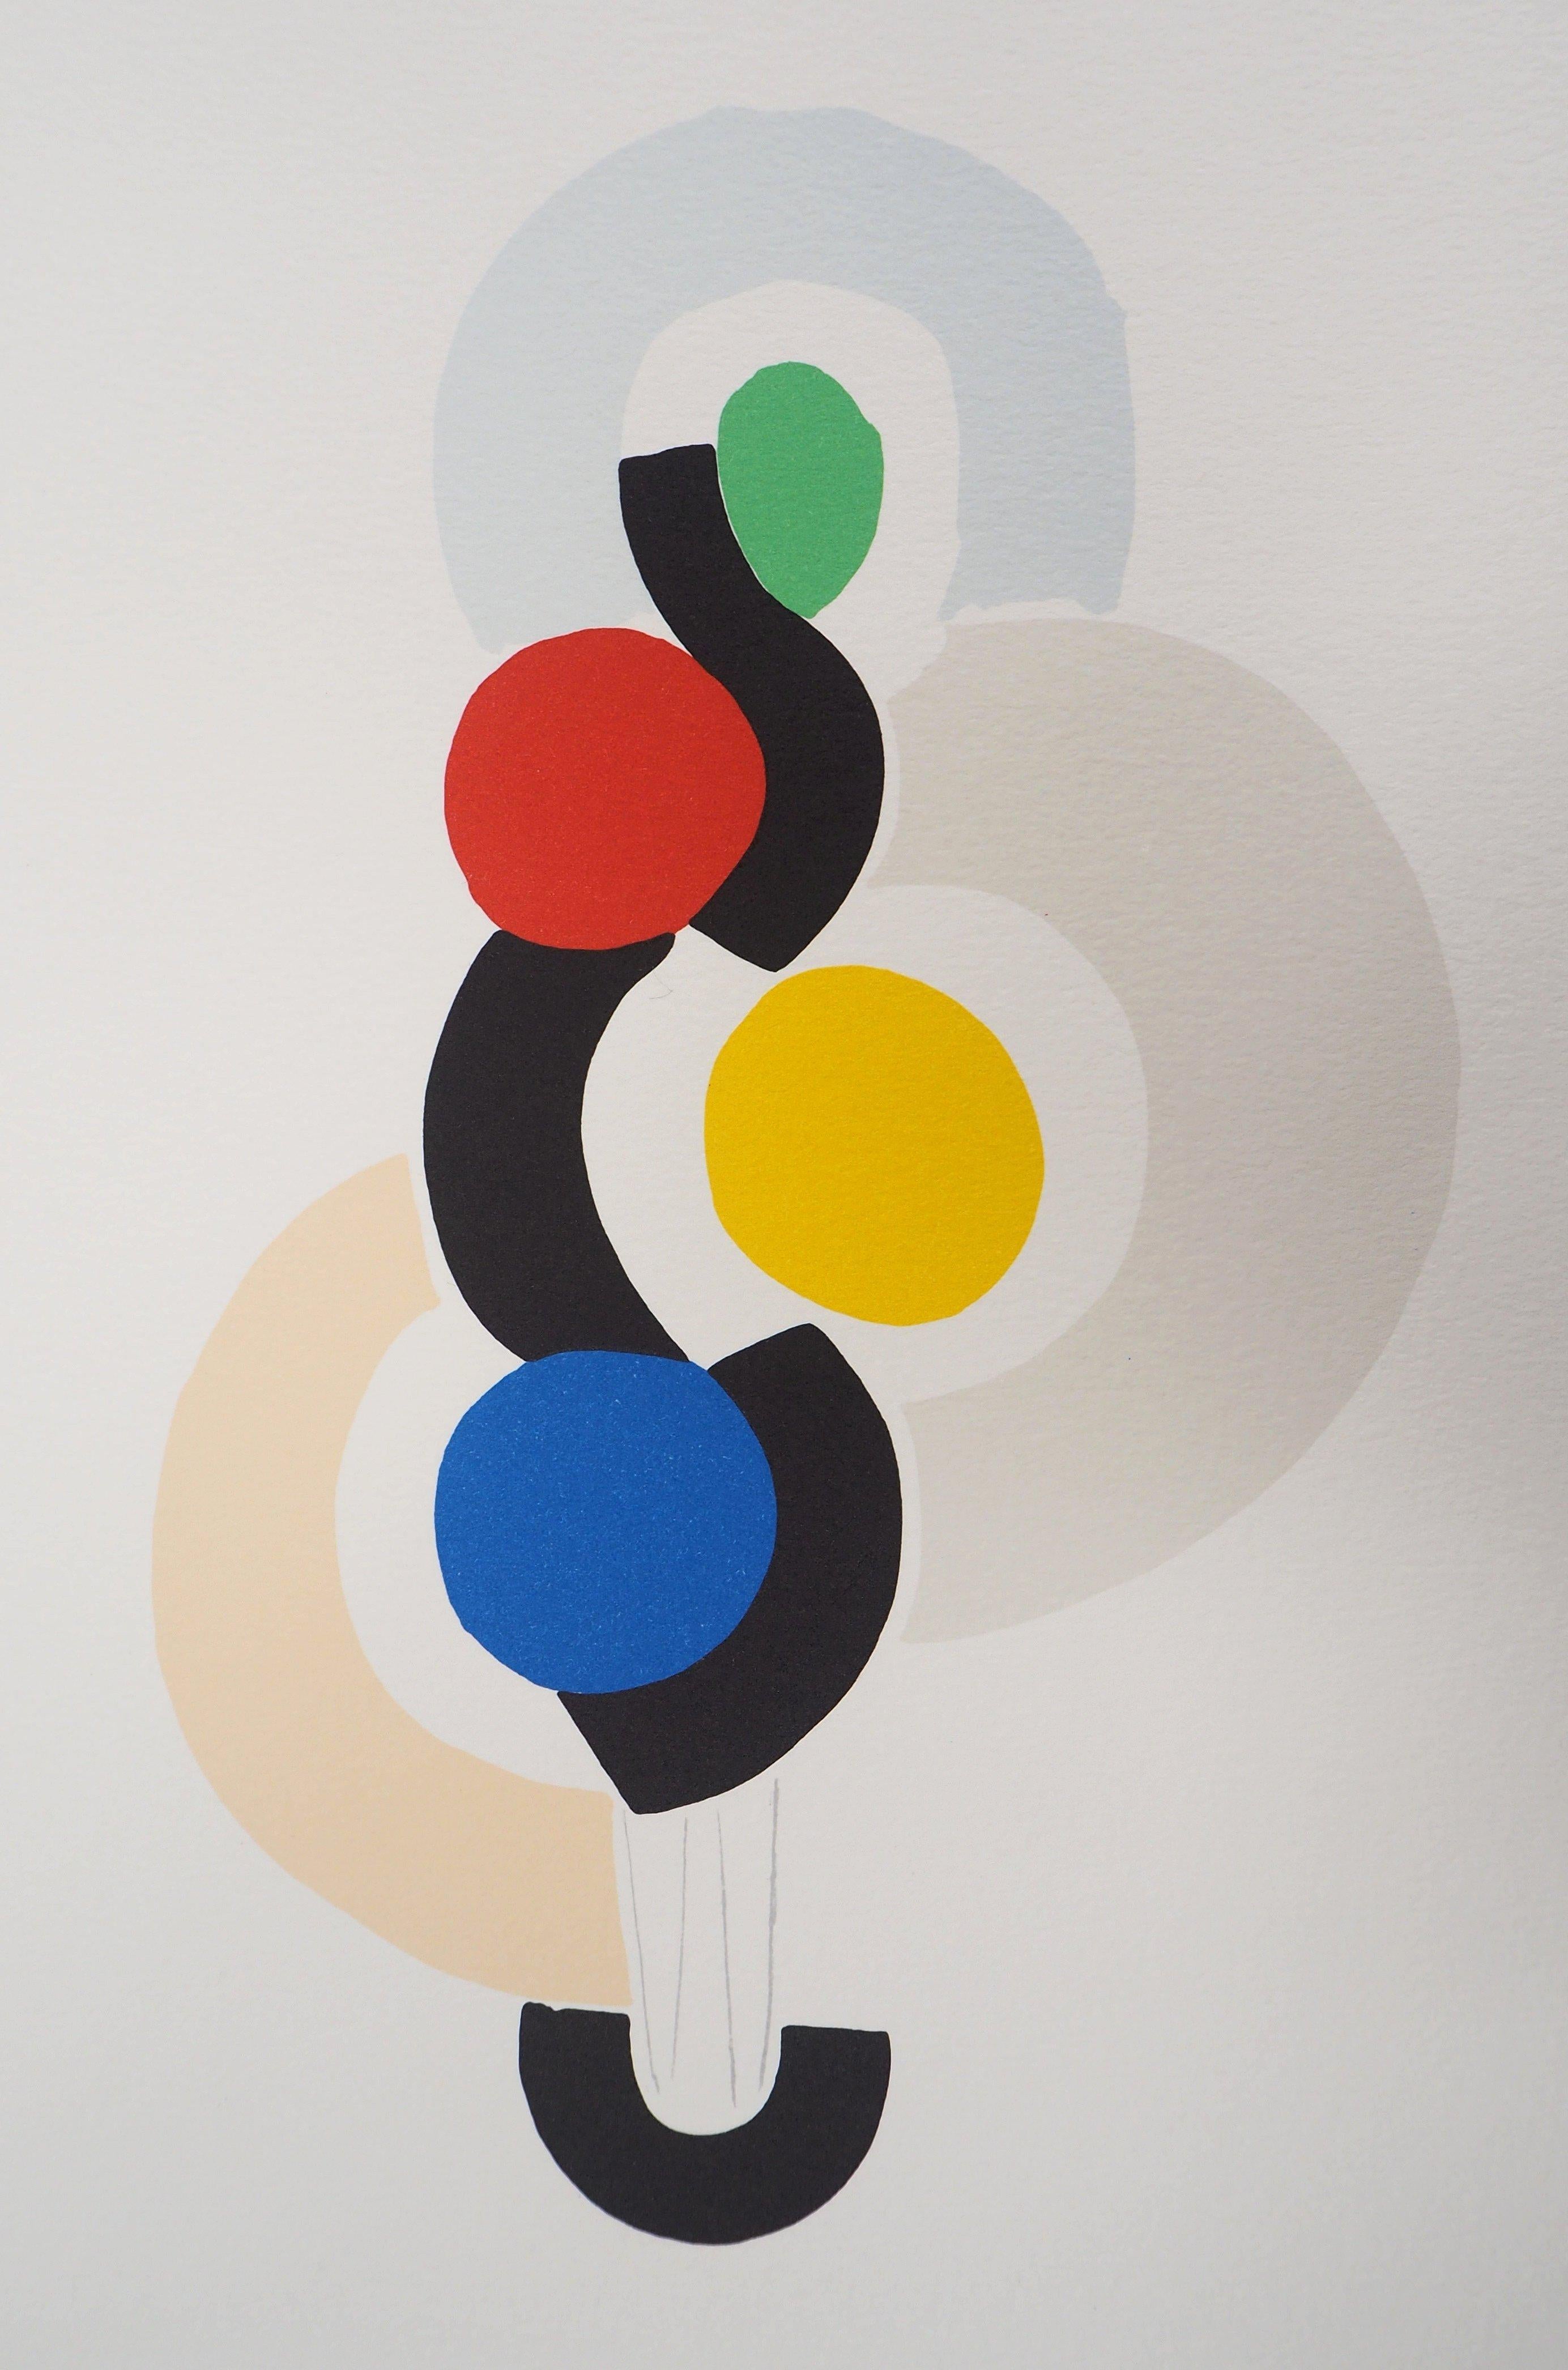 Rythm and Dance - Lithograph (Artcurial edition) - Modern Print by Sonia Delaunay